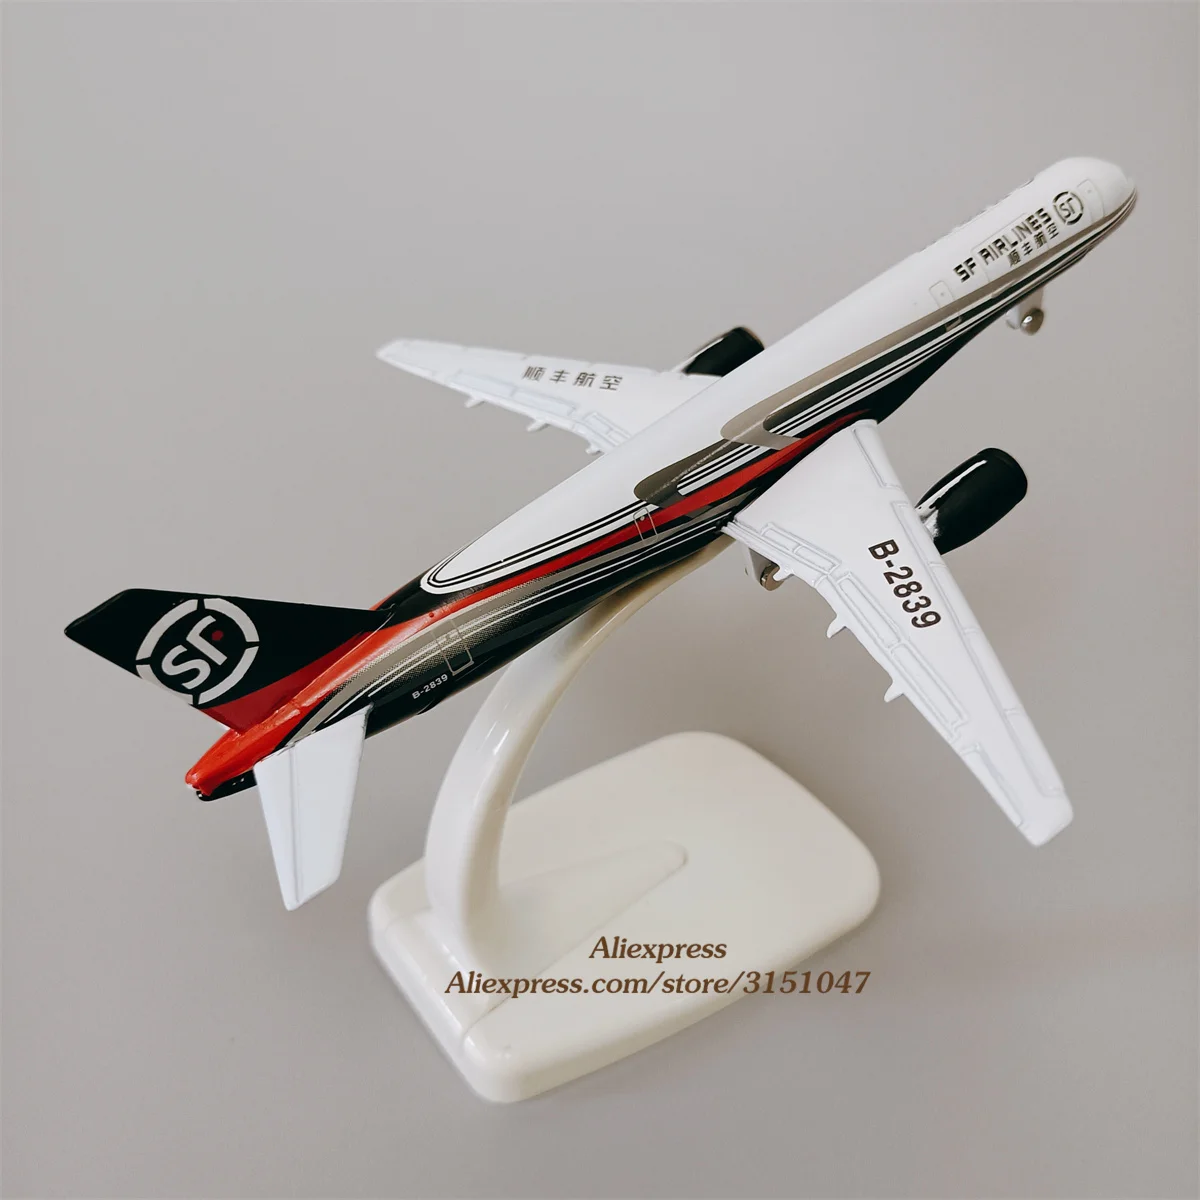 

NEW Air SF Airlines Boeing 757 B757 B-2839 Airline Metal Alloy Plane Model Airplane 1:400 Scale Diecast Aircraft w Wheels 16cm